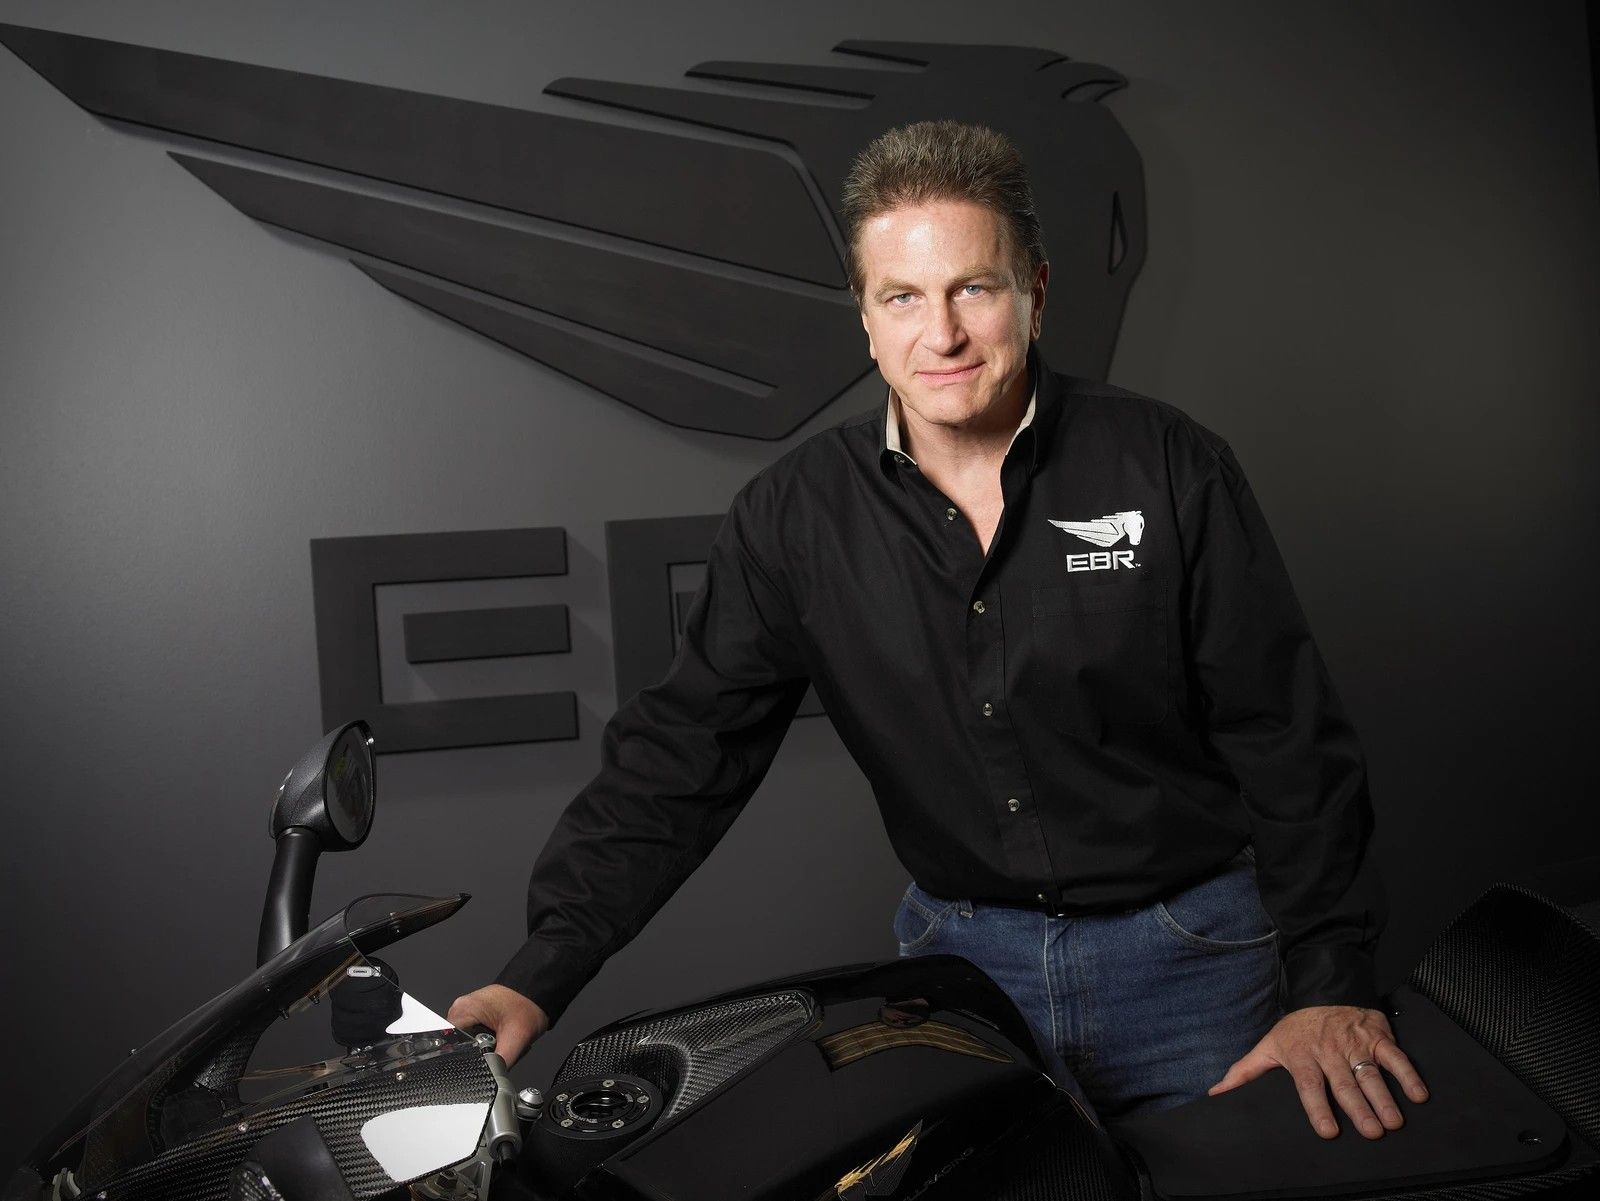 Erik Buell with an EBR motorcycle.